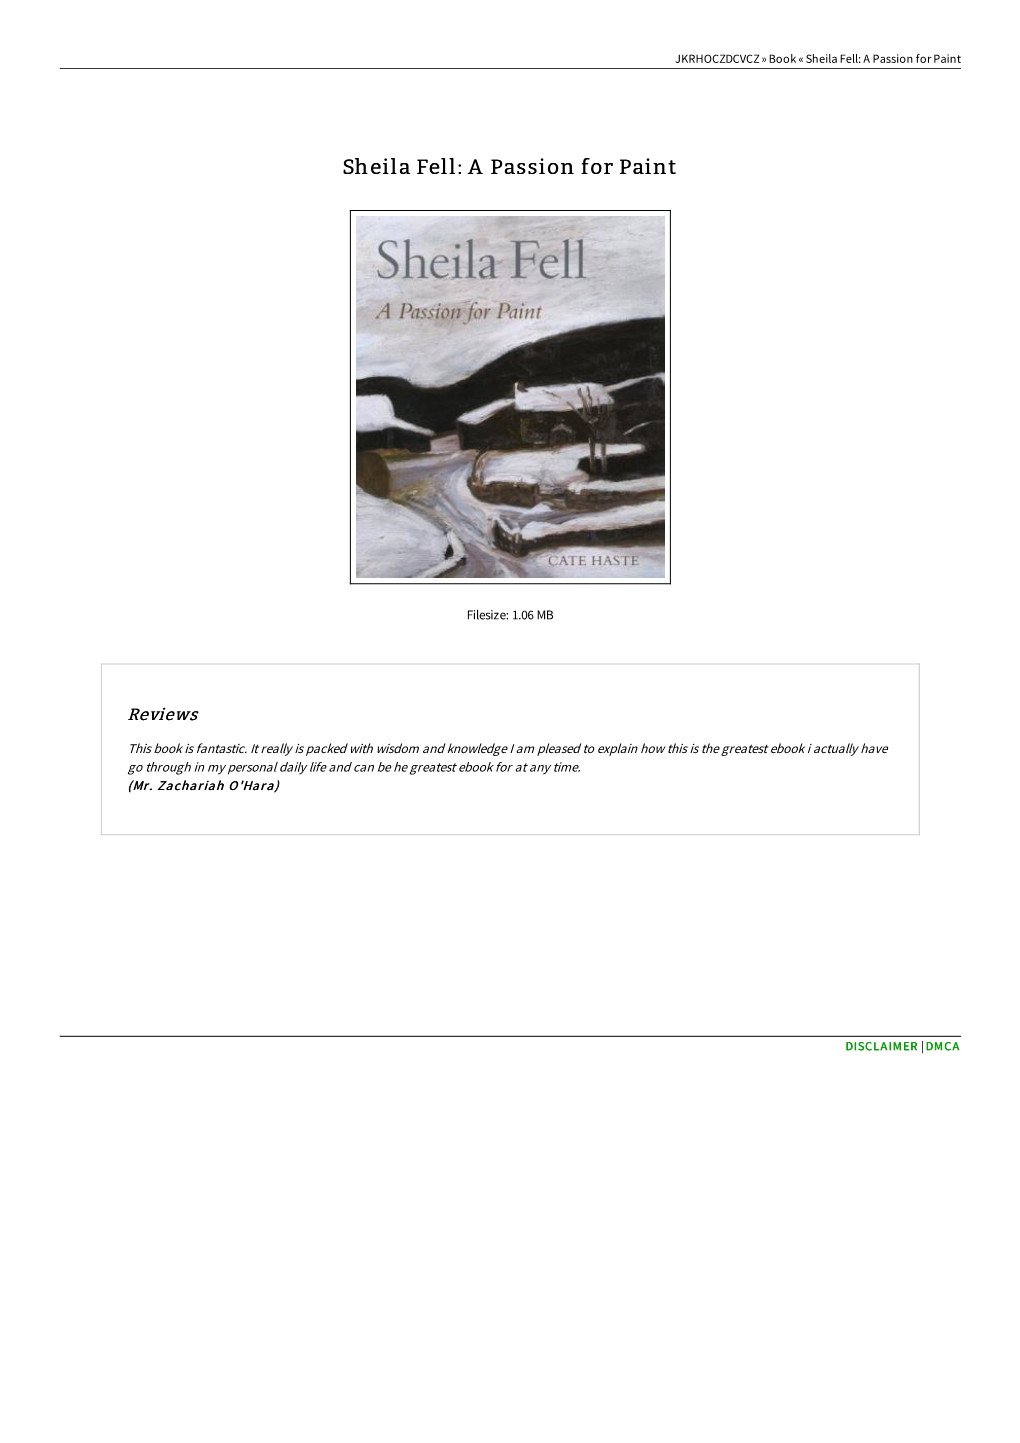 Sheila Fell: a Passion for Paint